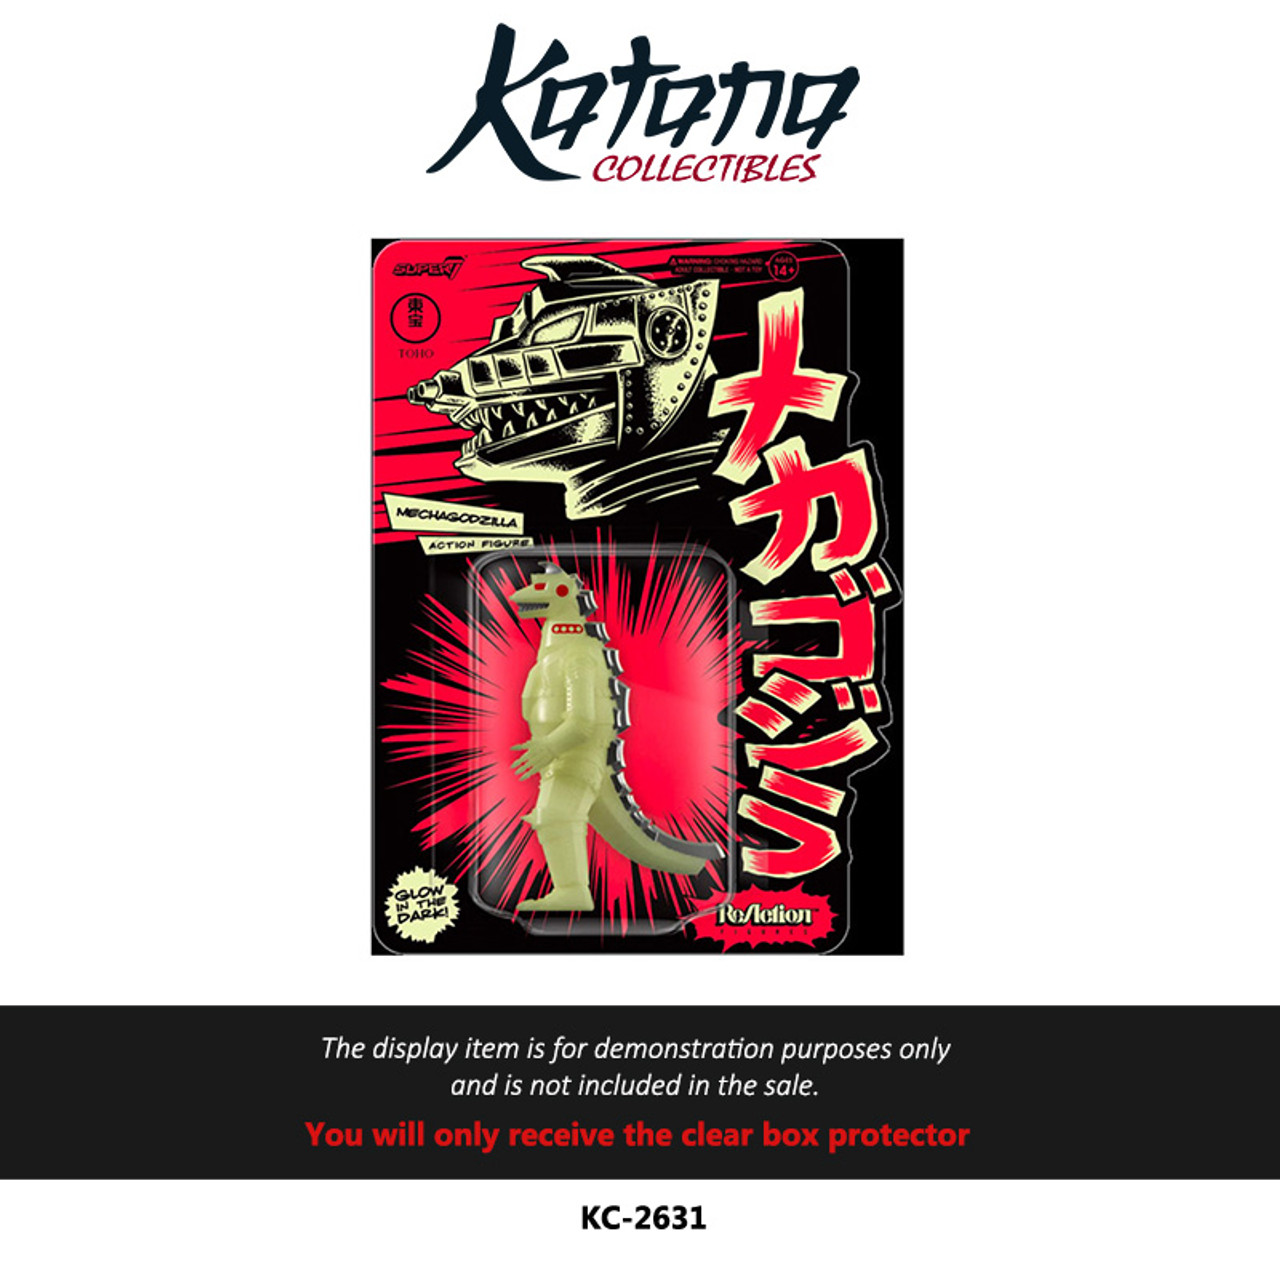 Katana Collectibles Protector For Mechagodzilla (1974) Super 7 SDCC Exclusive Glow in the Dark